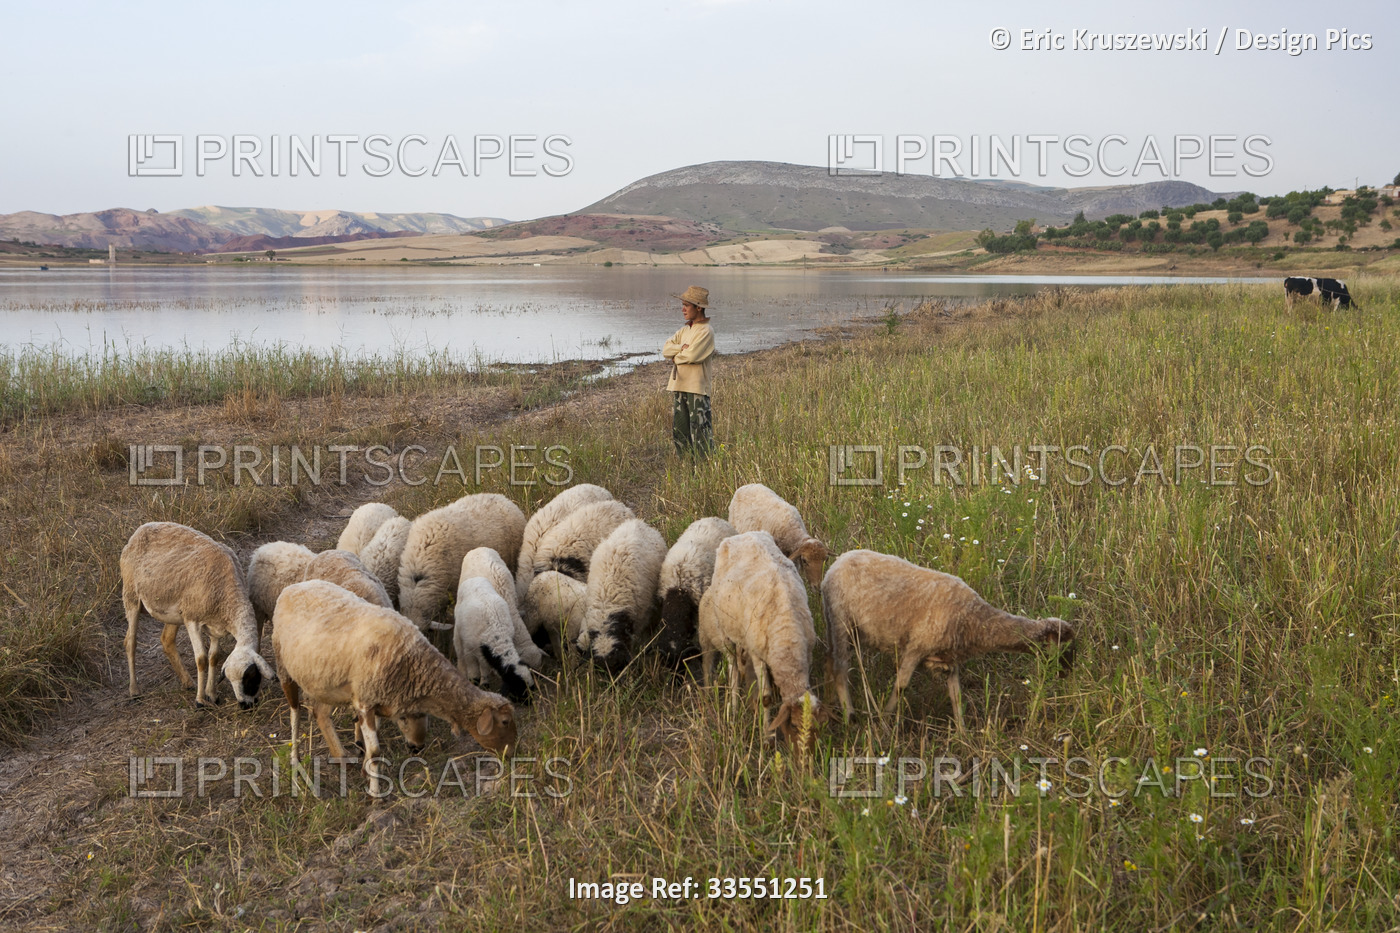 In the rural outskirts of Fes, a young sheep herder looks out over pristine ...